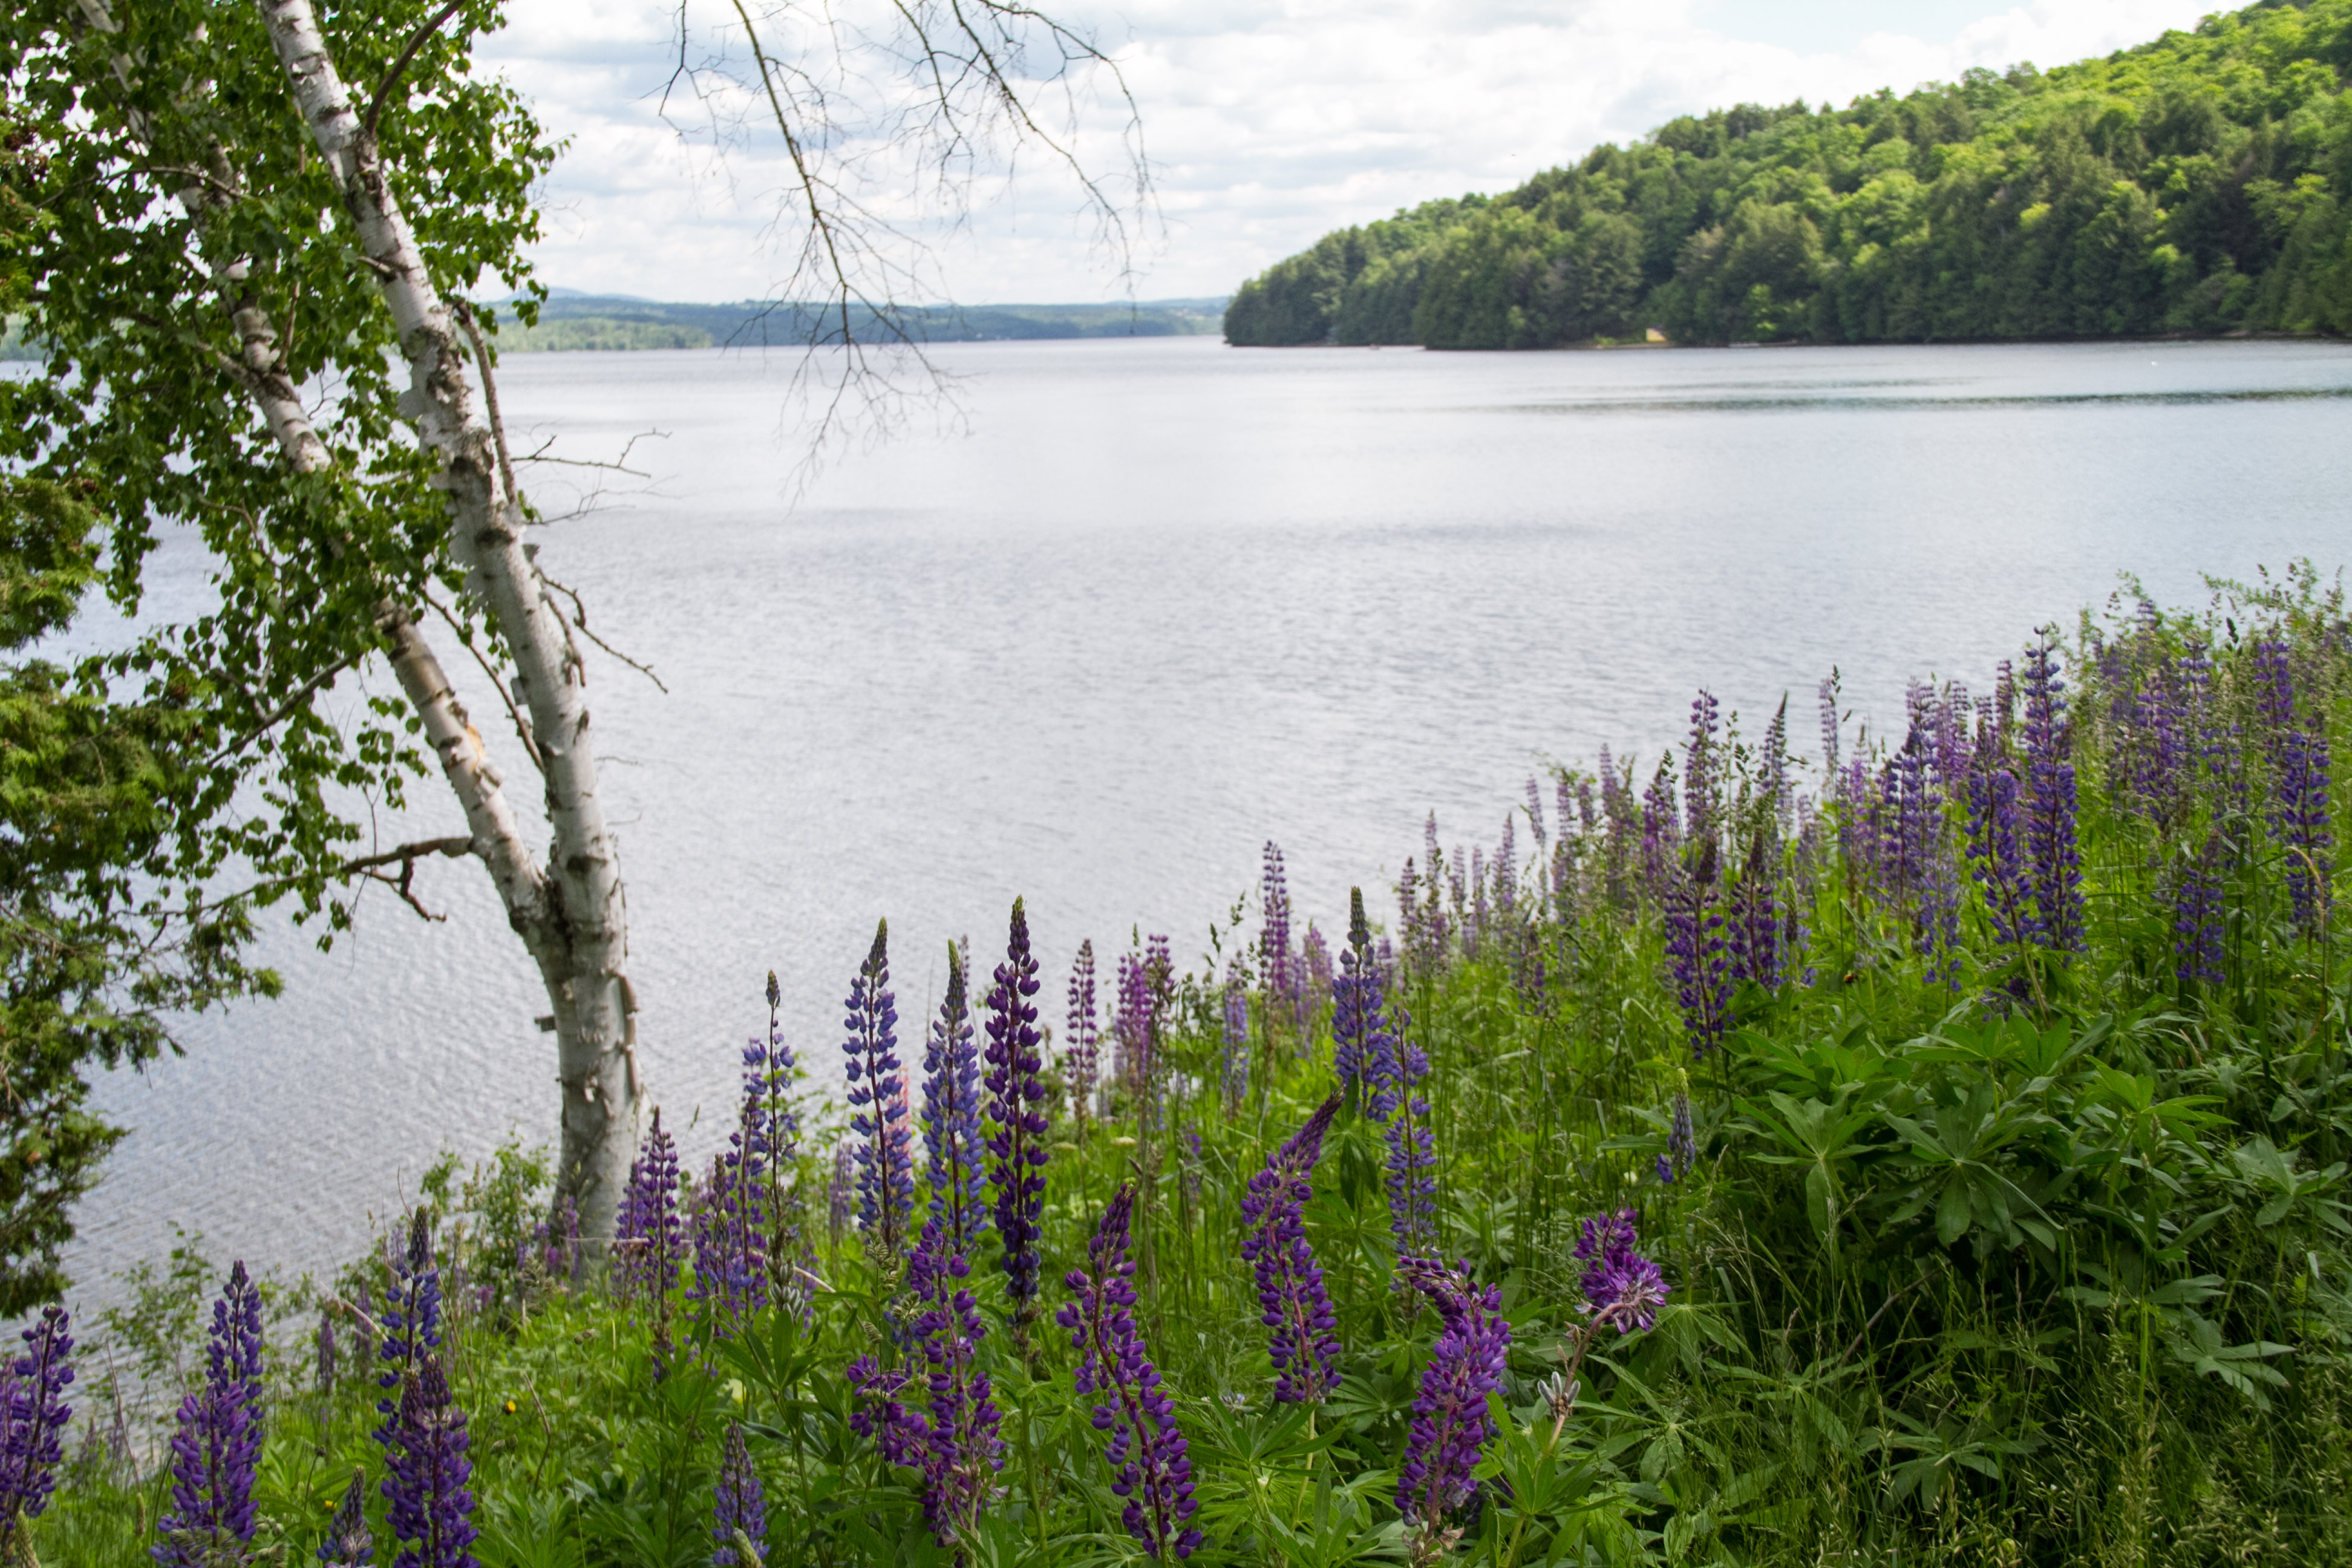 Lupin blooms wild on the bank of Lake Massawippi.